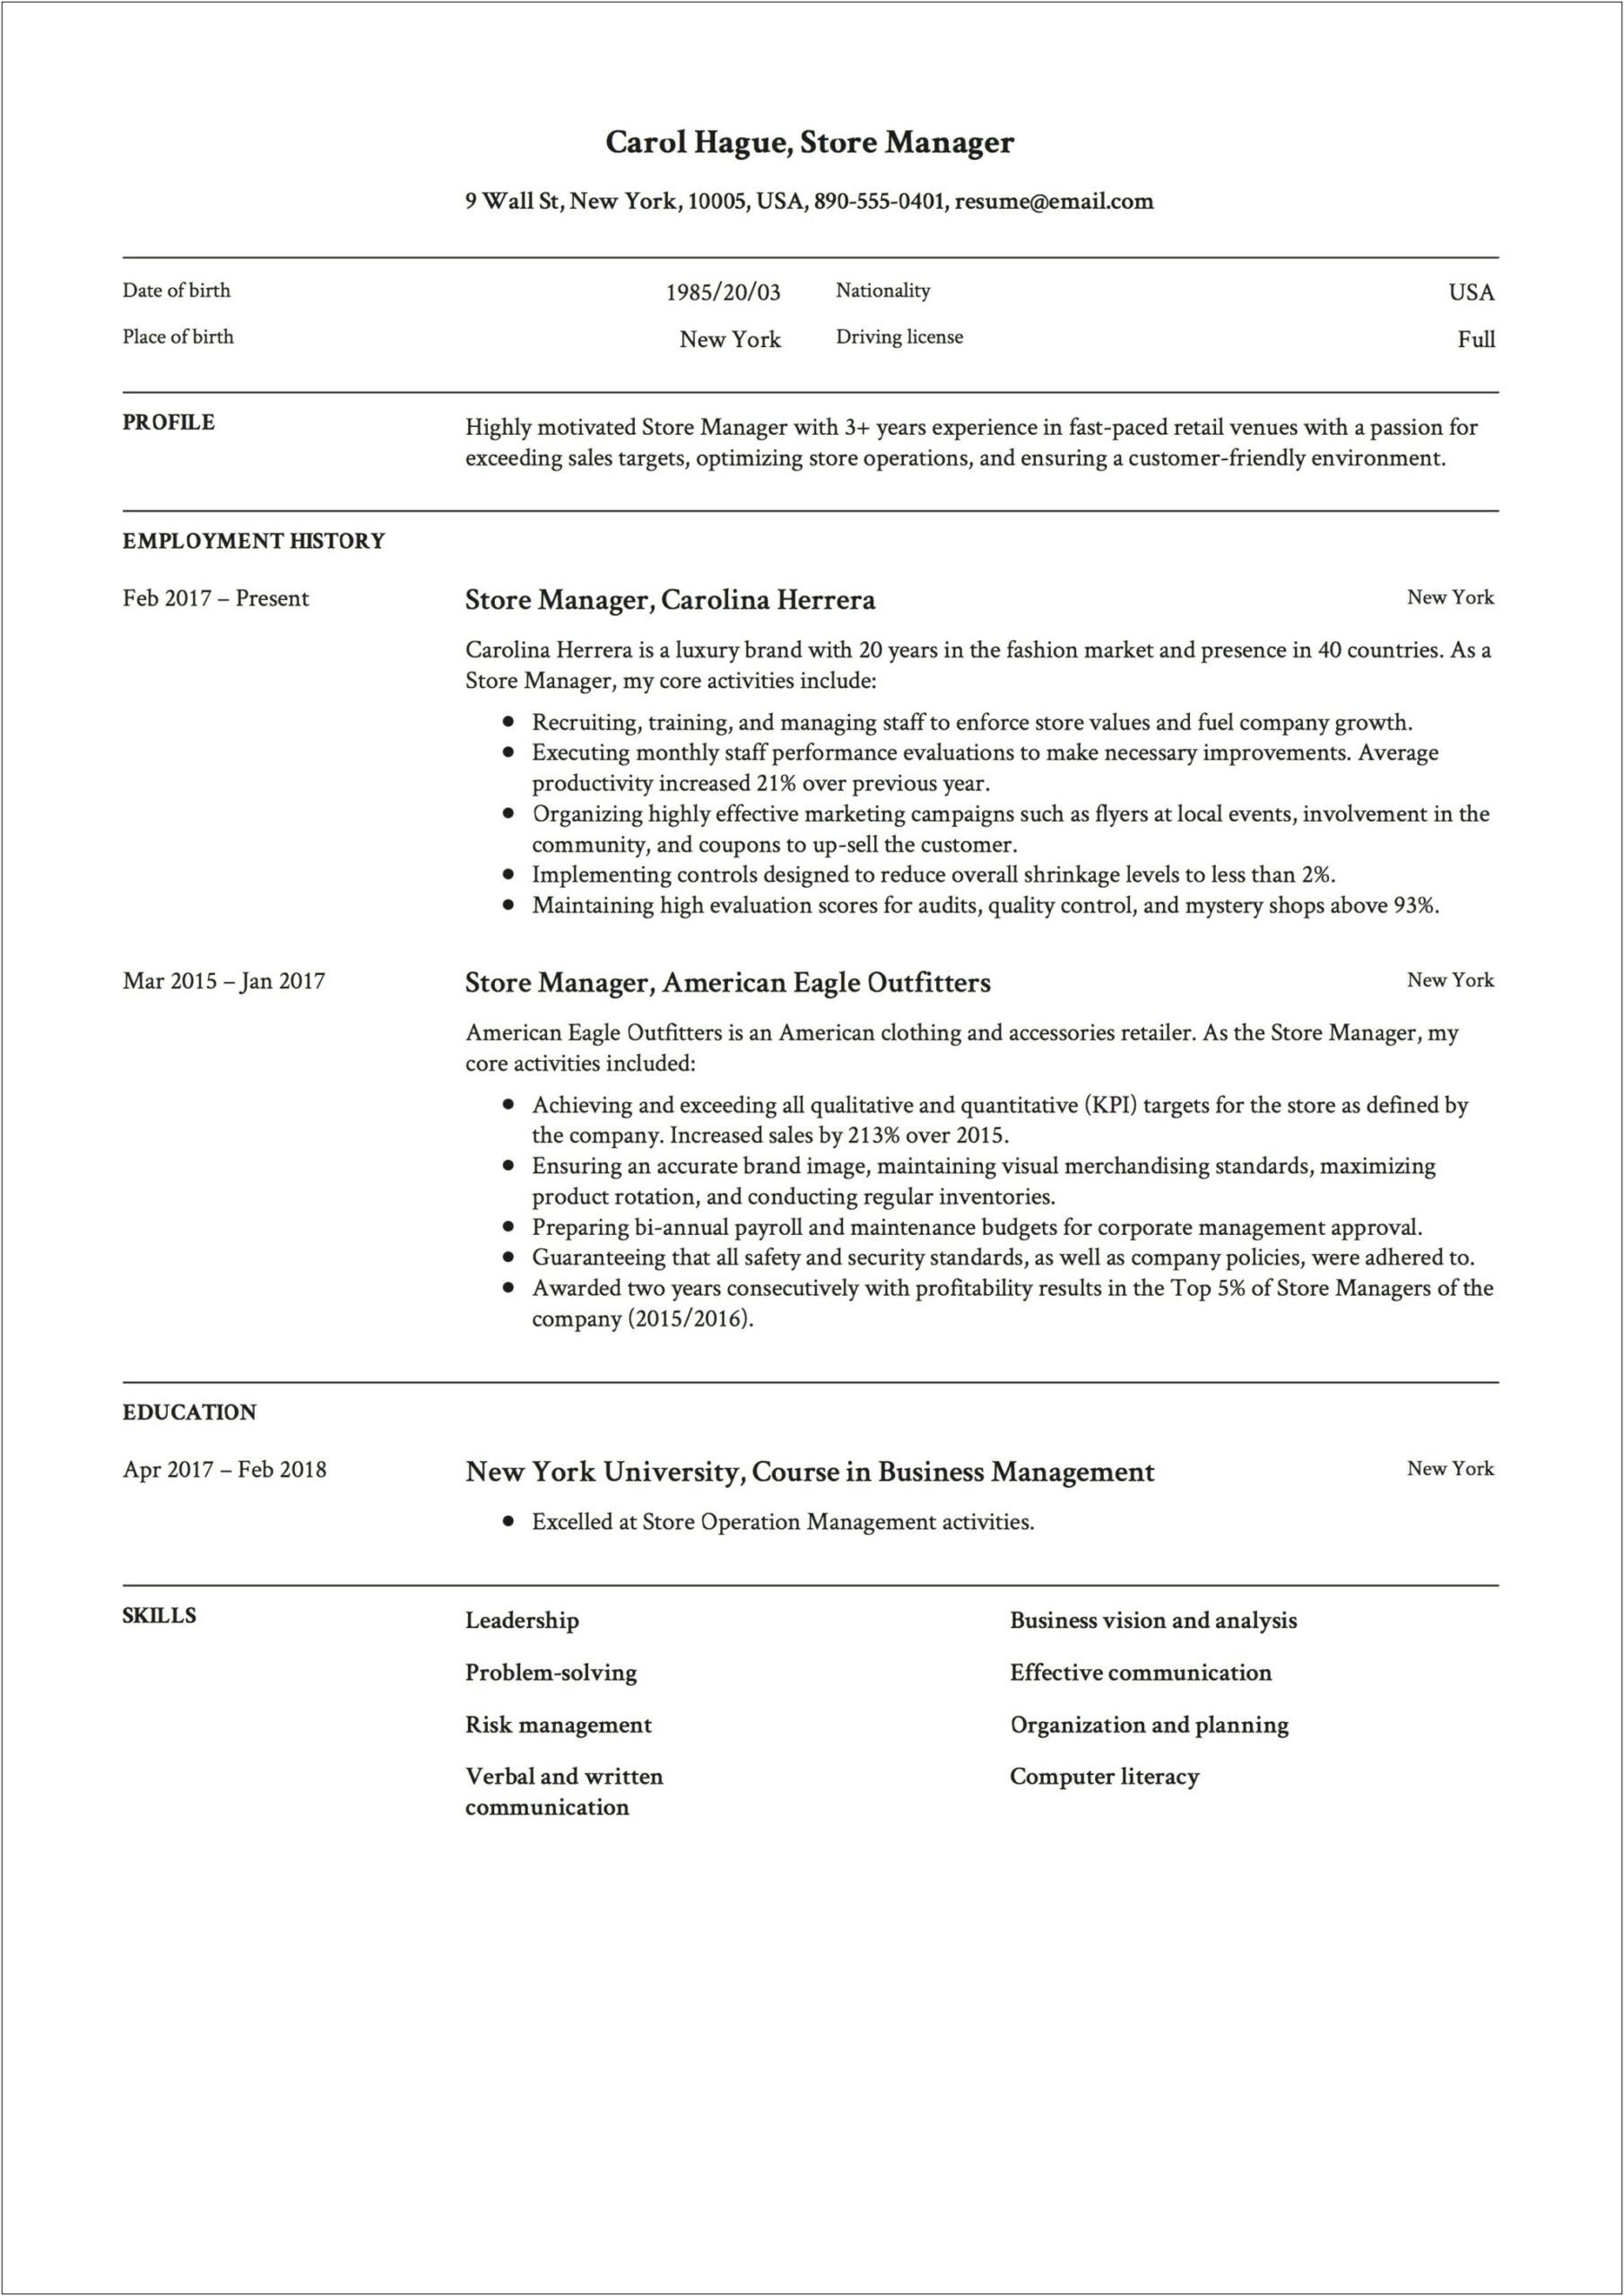 Construction Store Keeper Resume Sample Word